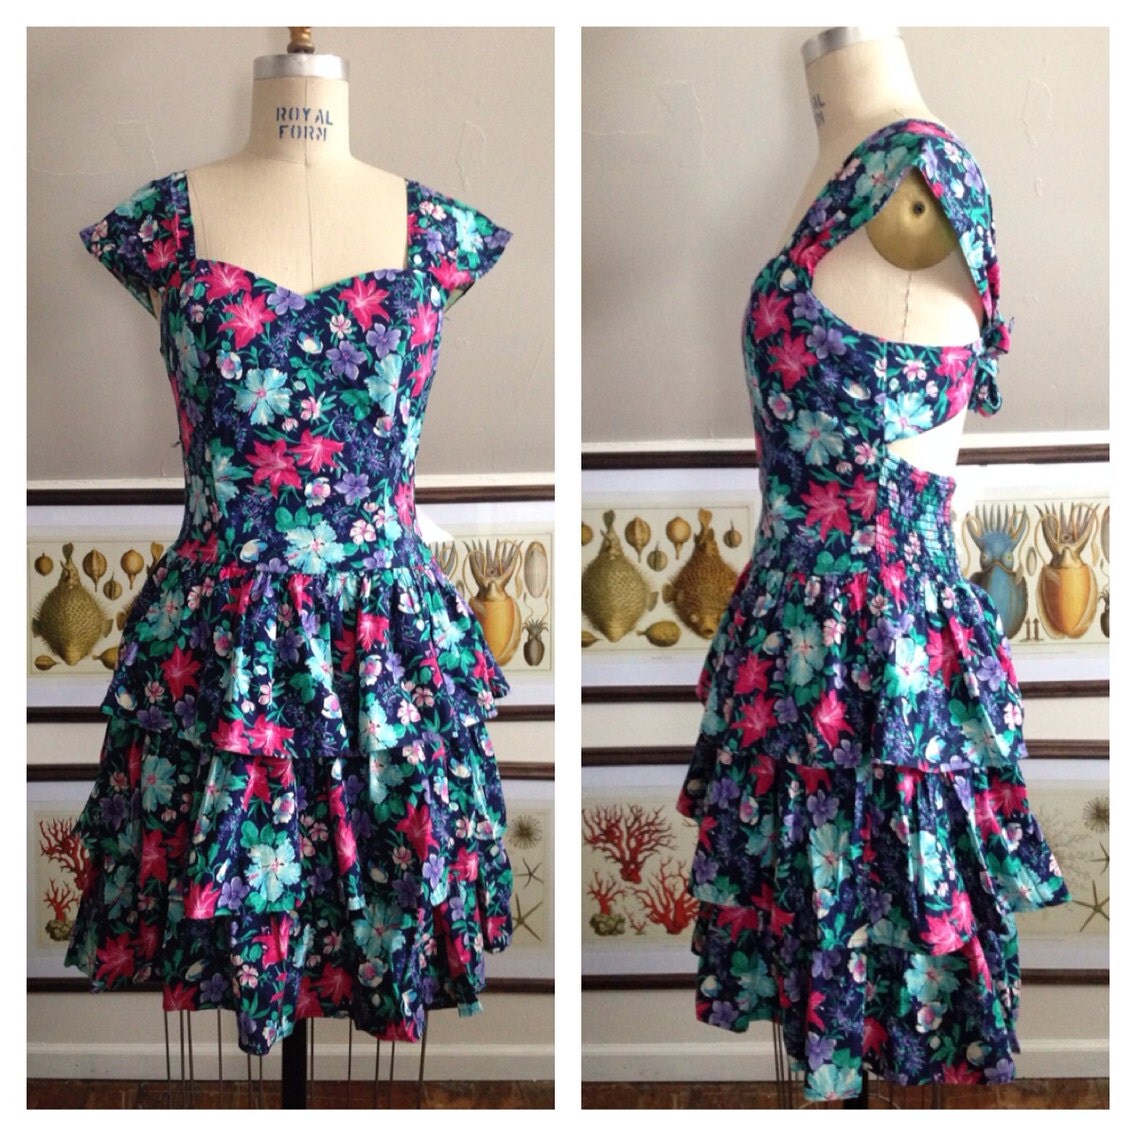 Vintage 1980s Pretty Floral Dress/ Open Back with Tie/